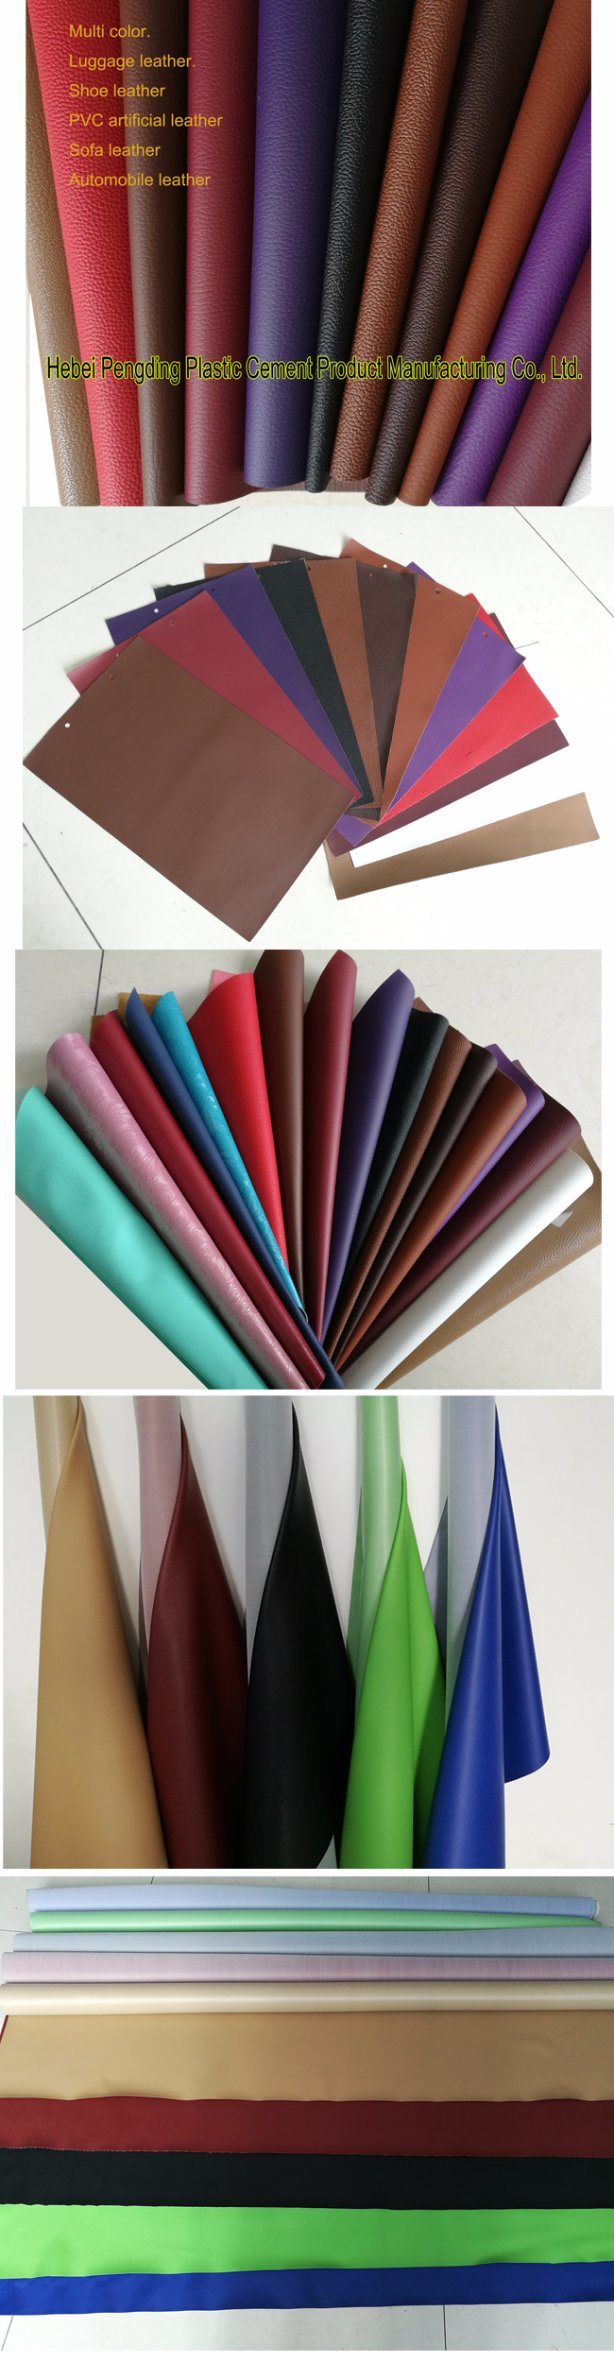 Customizable Thickness of Bags Leather, PVC Leather